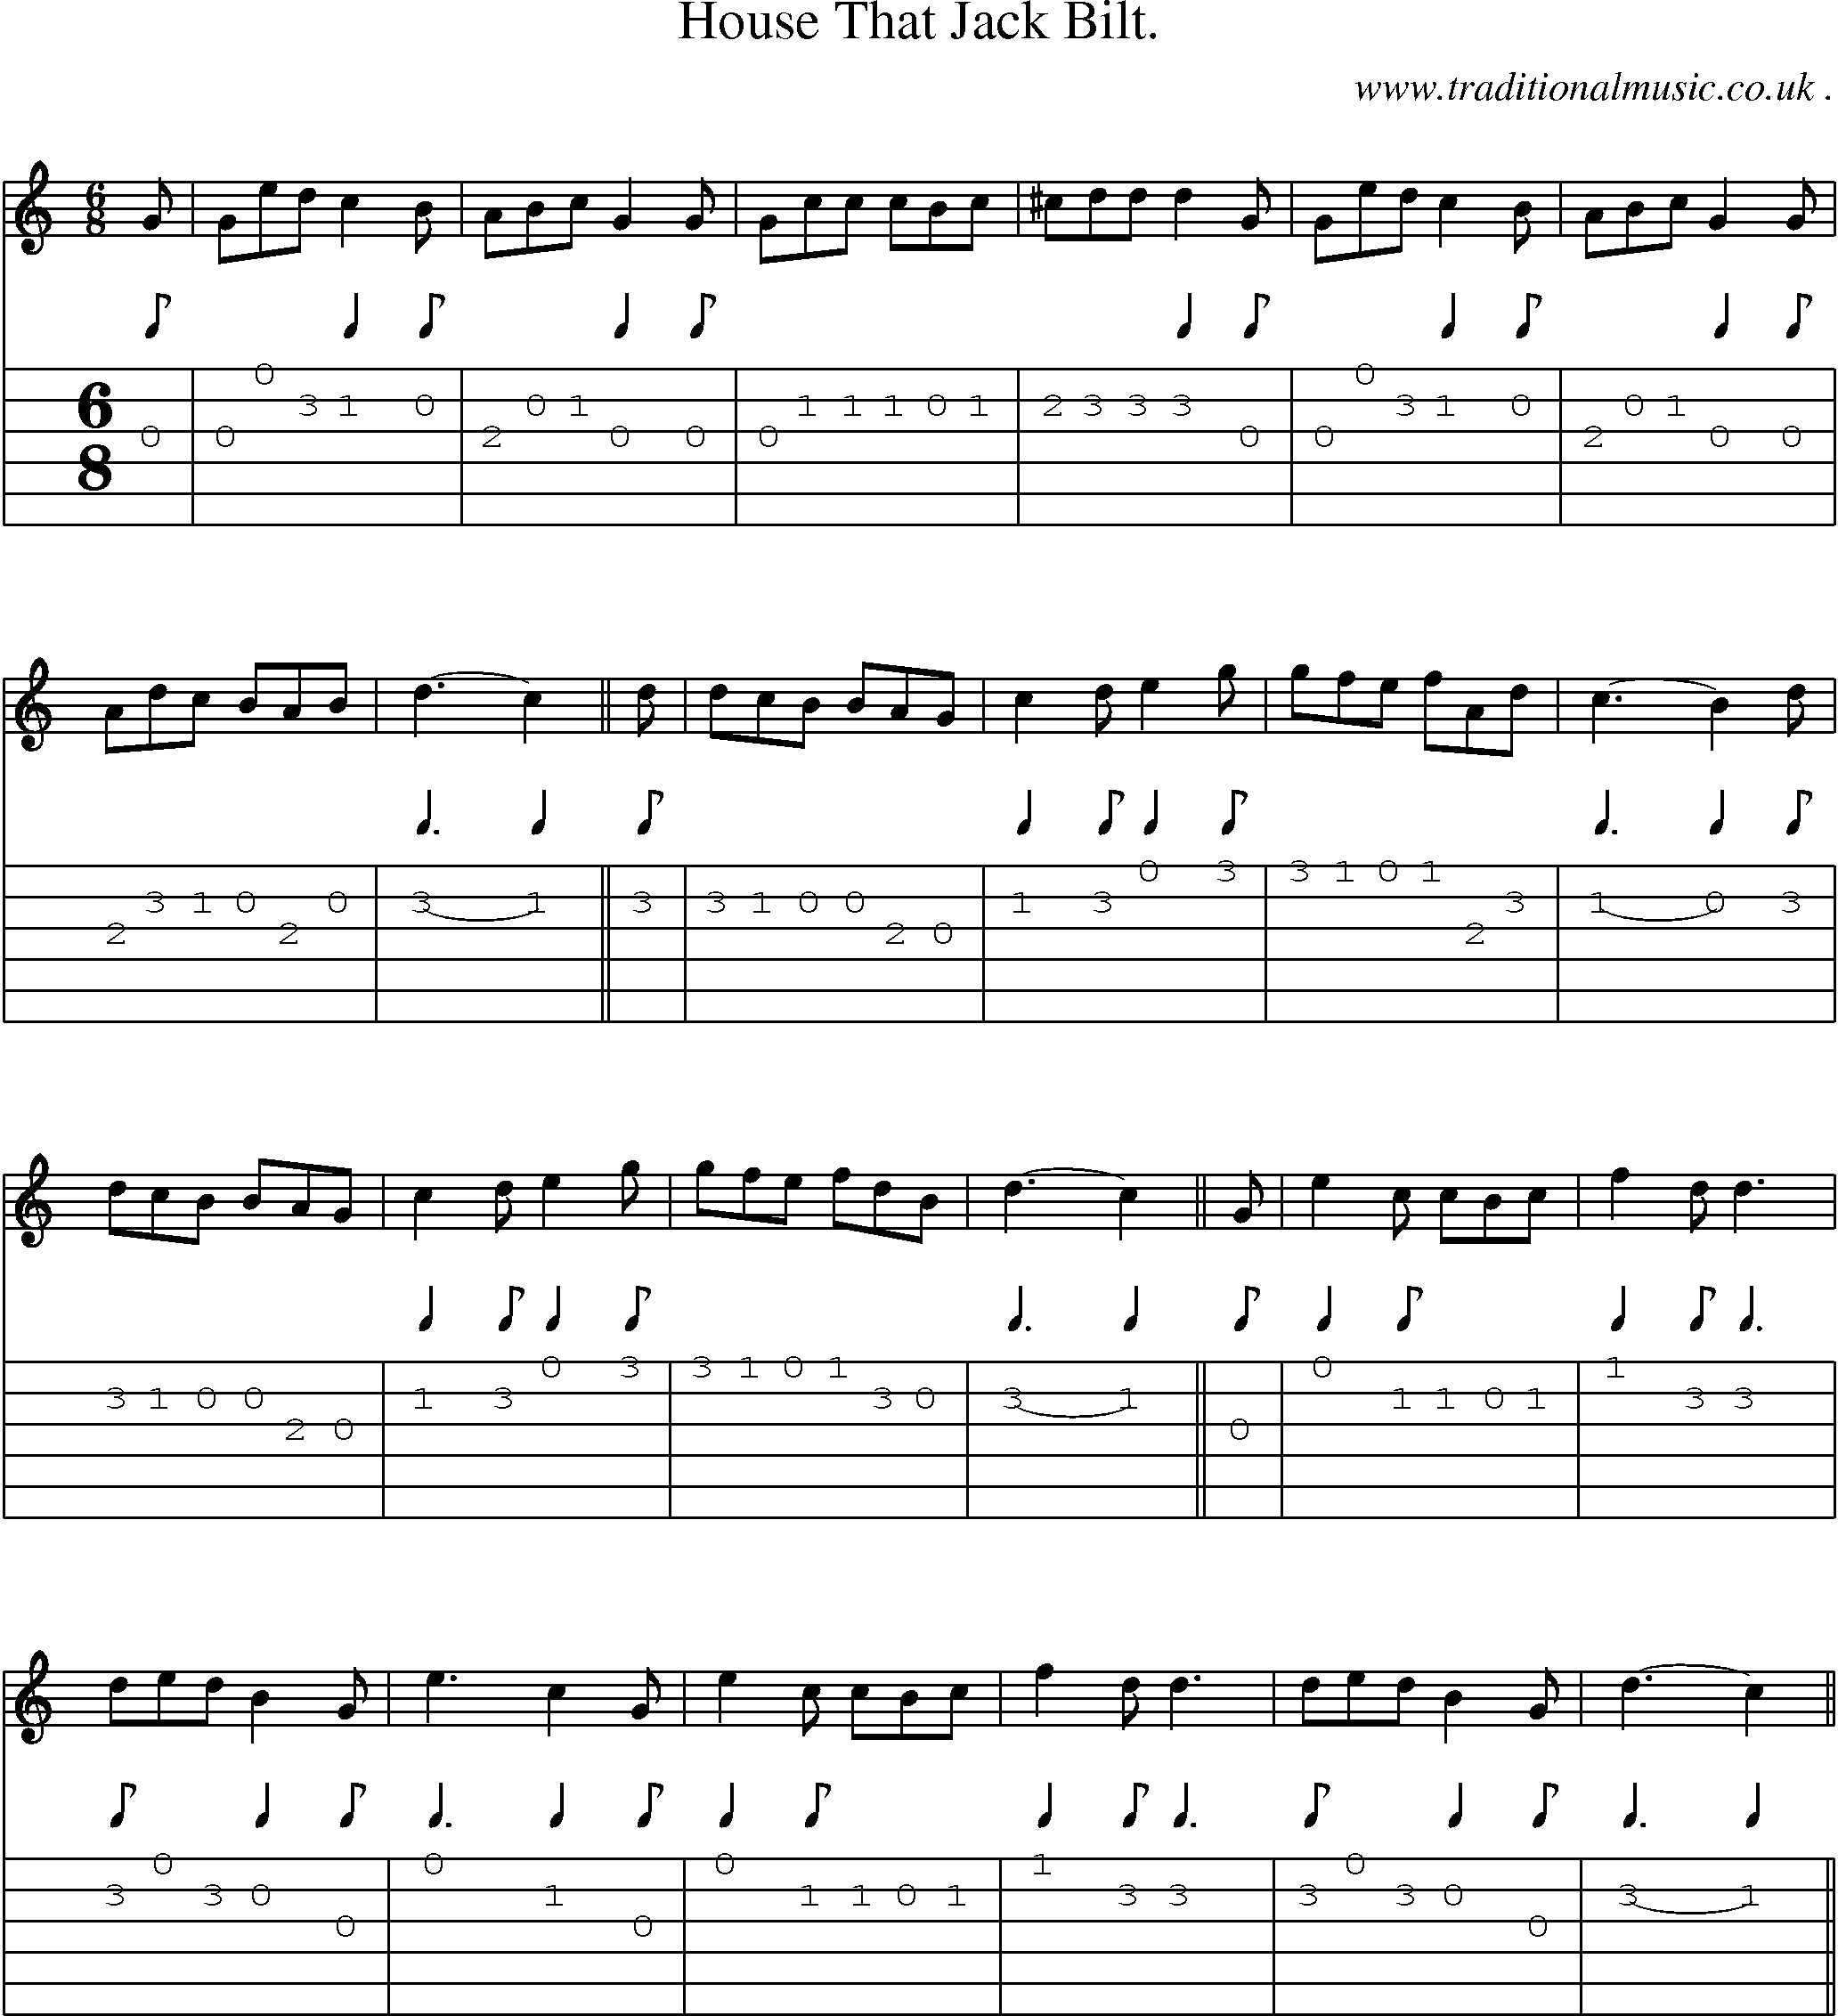 Sheet-Music and Guitar Tabs for House That Jack Bilt